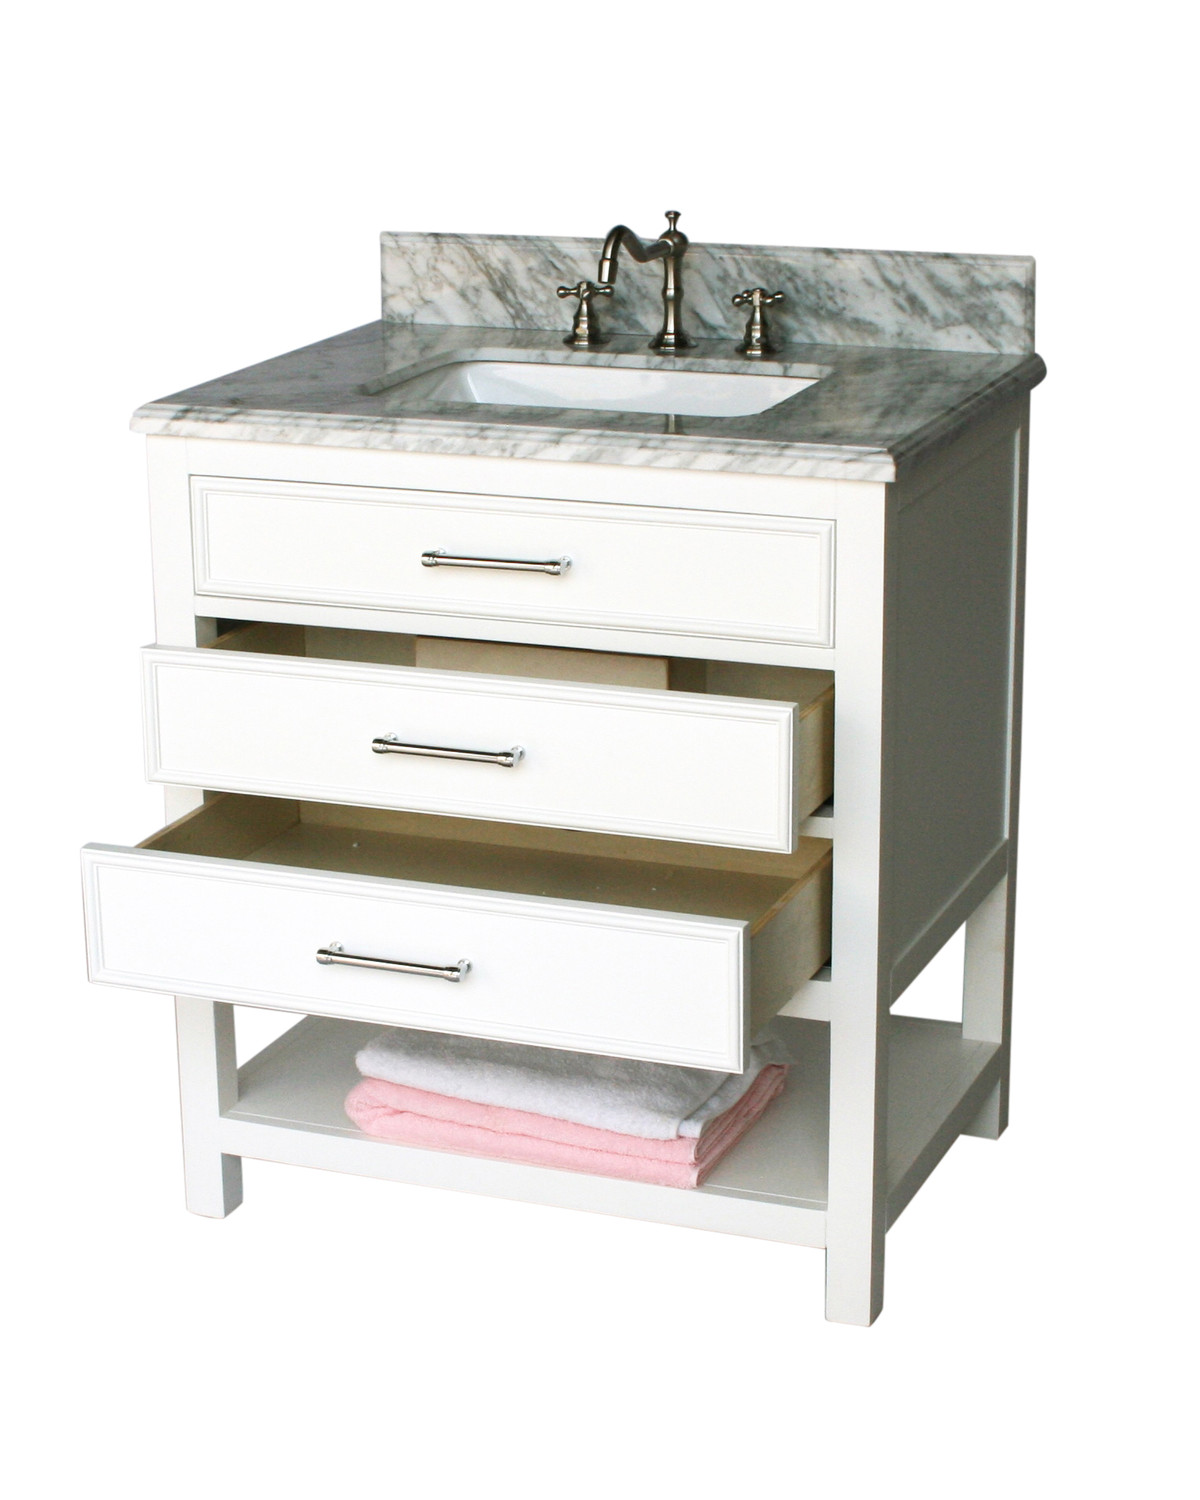 31" Adelina Contemporary Style Single Sink Bathroom Vanity with Italian Carrara Marble Countertop and Pure White Finish